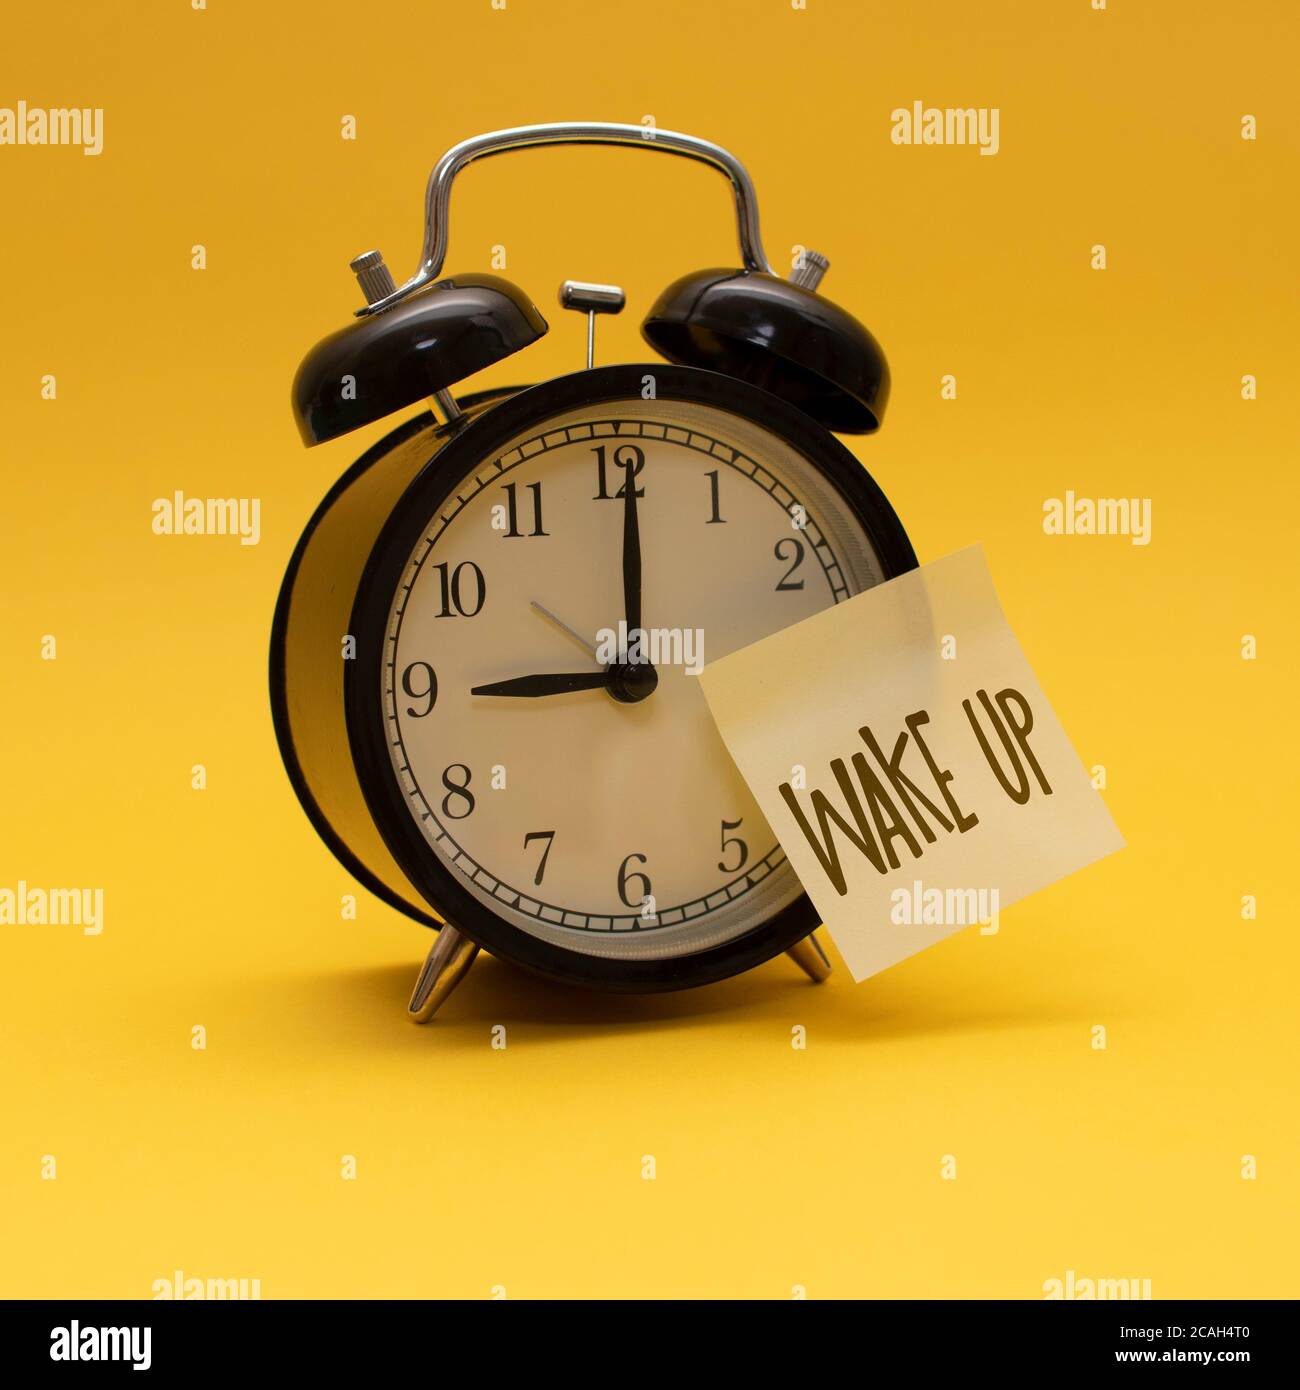 Time to wake up 9:00 Stock Photo